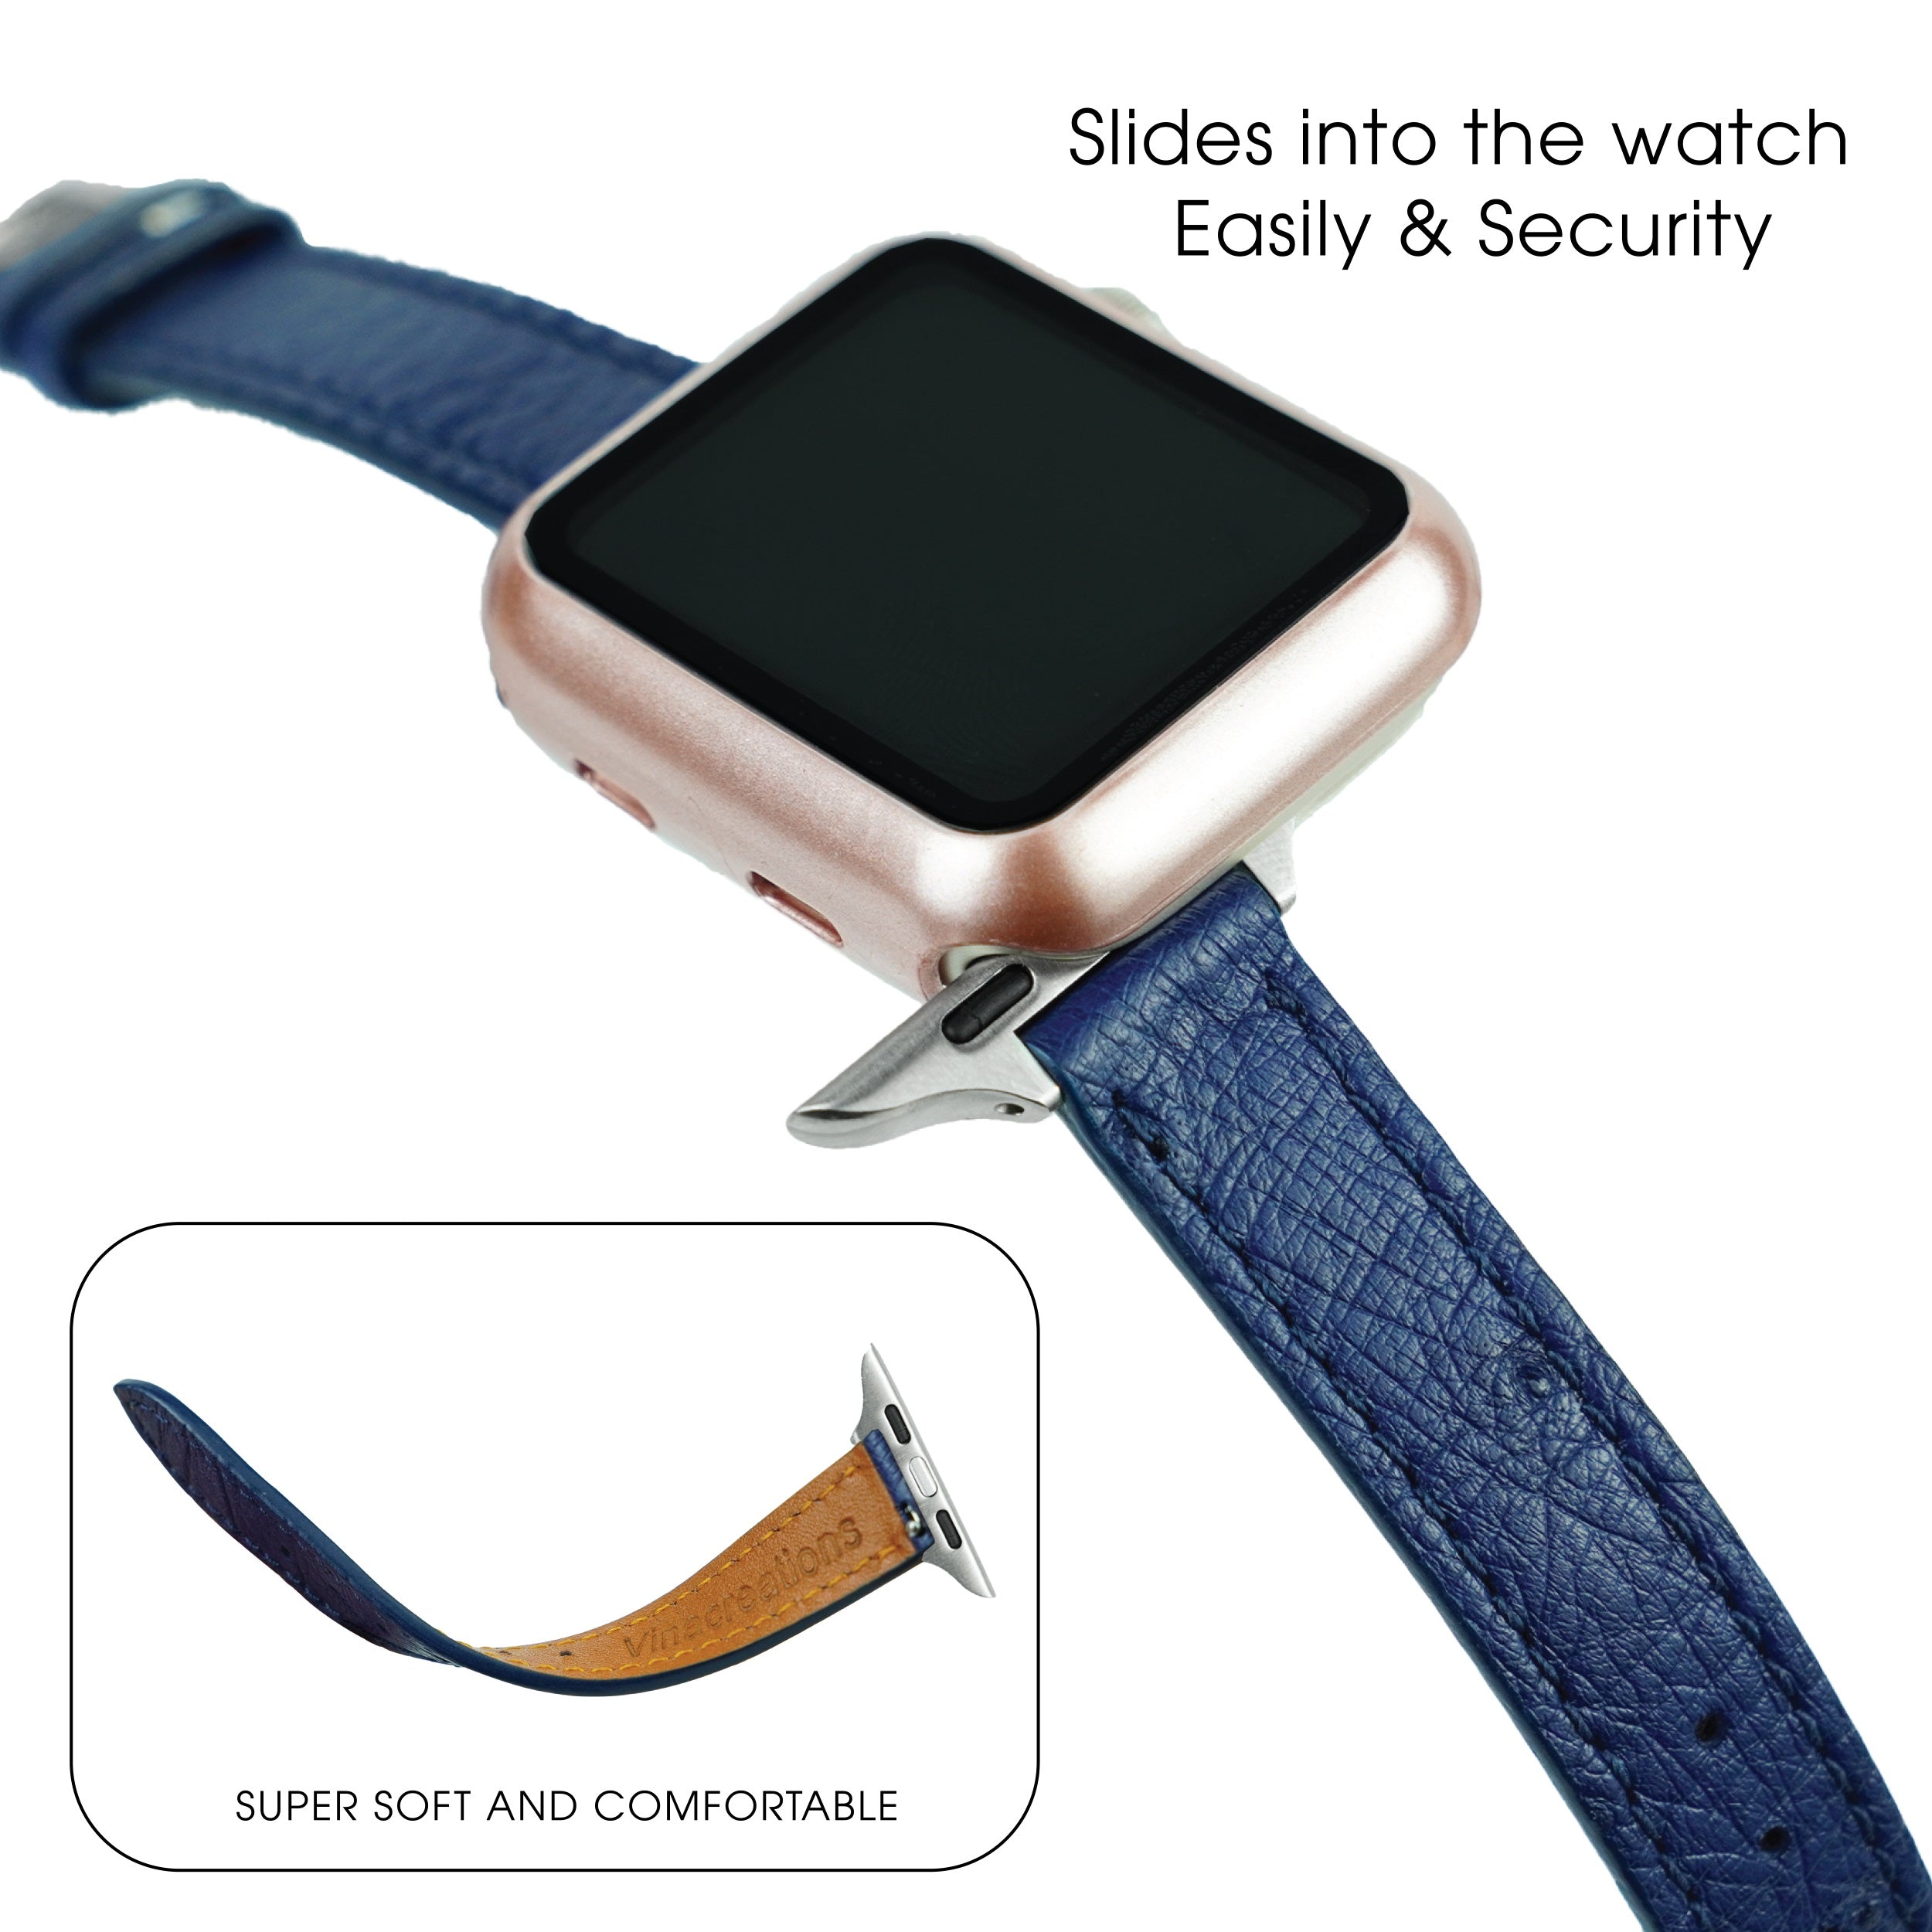 Copy of Blue Flat Ostrich Leather Band Compatible Apple Watch Iwatch 41mm Screen Protector Case Black Adapter Replacement Strap For Smartwatch Series 7 8 Leather Handmade AW-184S-W-41MM